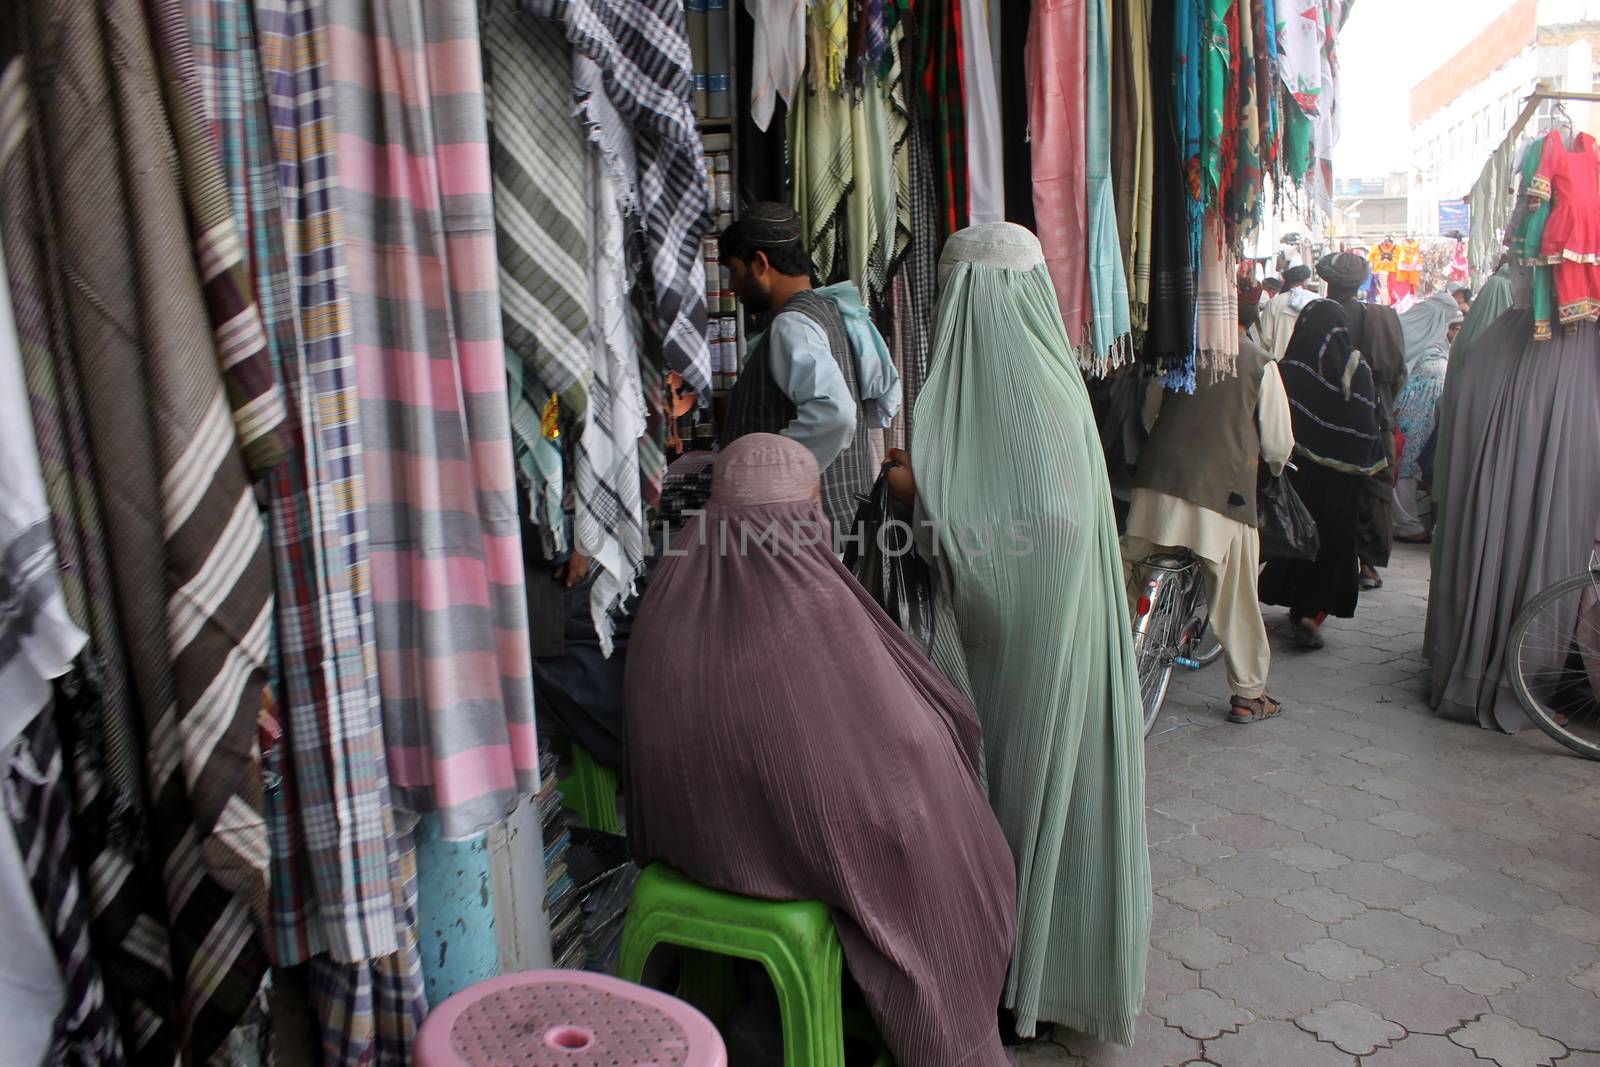 AFGHANISTAN, Kandahar: Crowds are out shopping in Charso Bazaar for Eid on September 22, 2015. Men in traditional dress and women in burqas buy dried fruits, biscuits, clothes, shoes, hats and things for their homes in Charso Bazaar, Kandahar. 